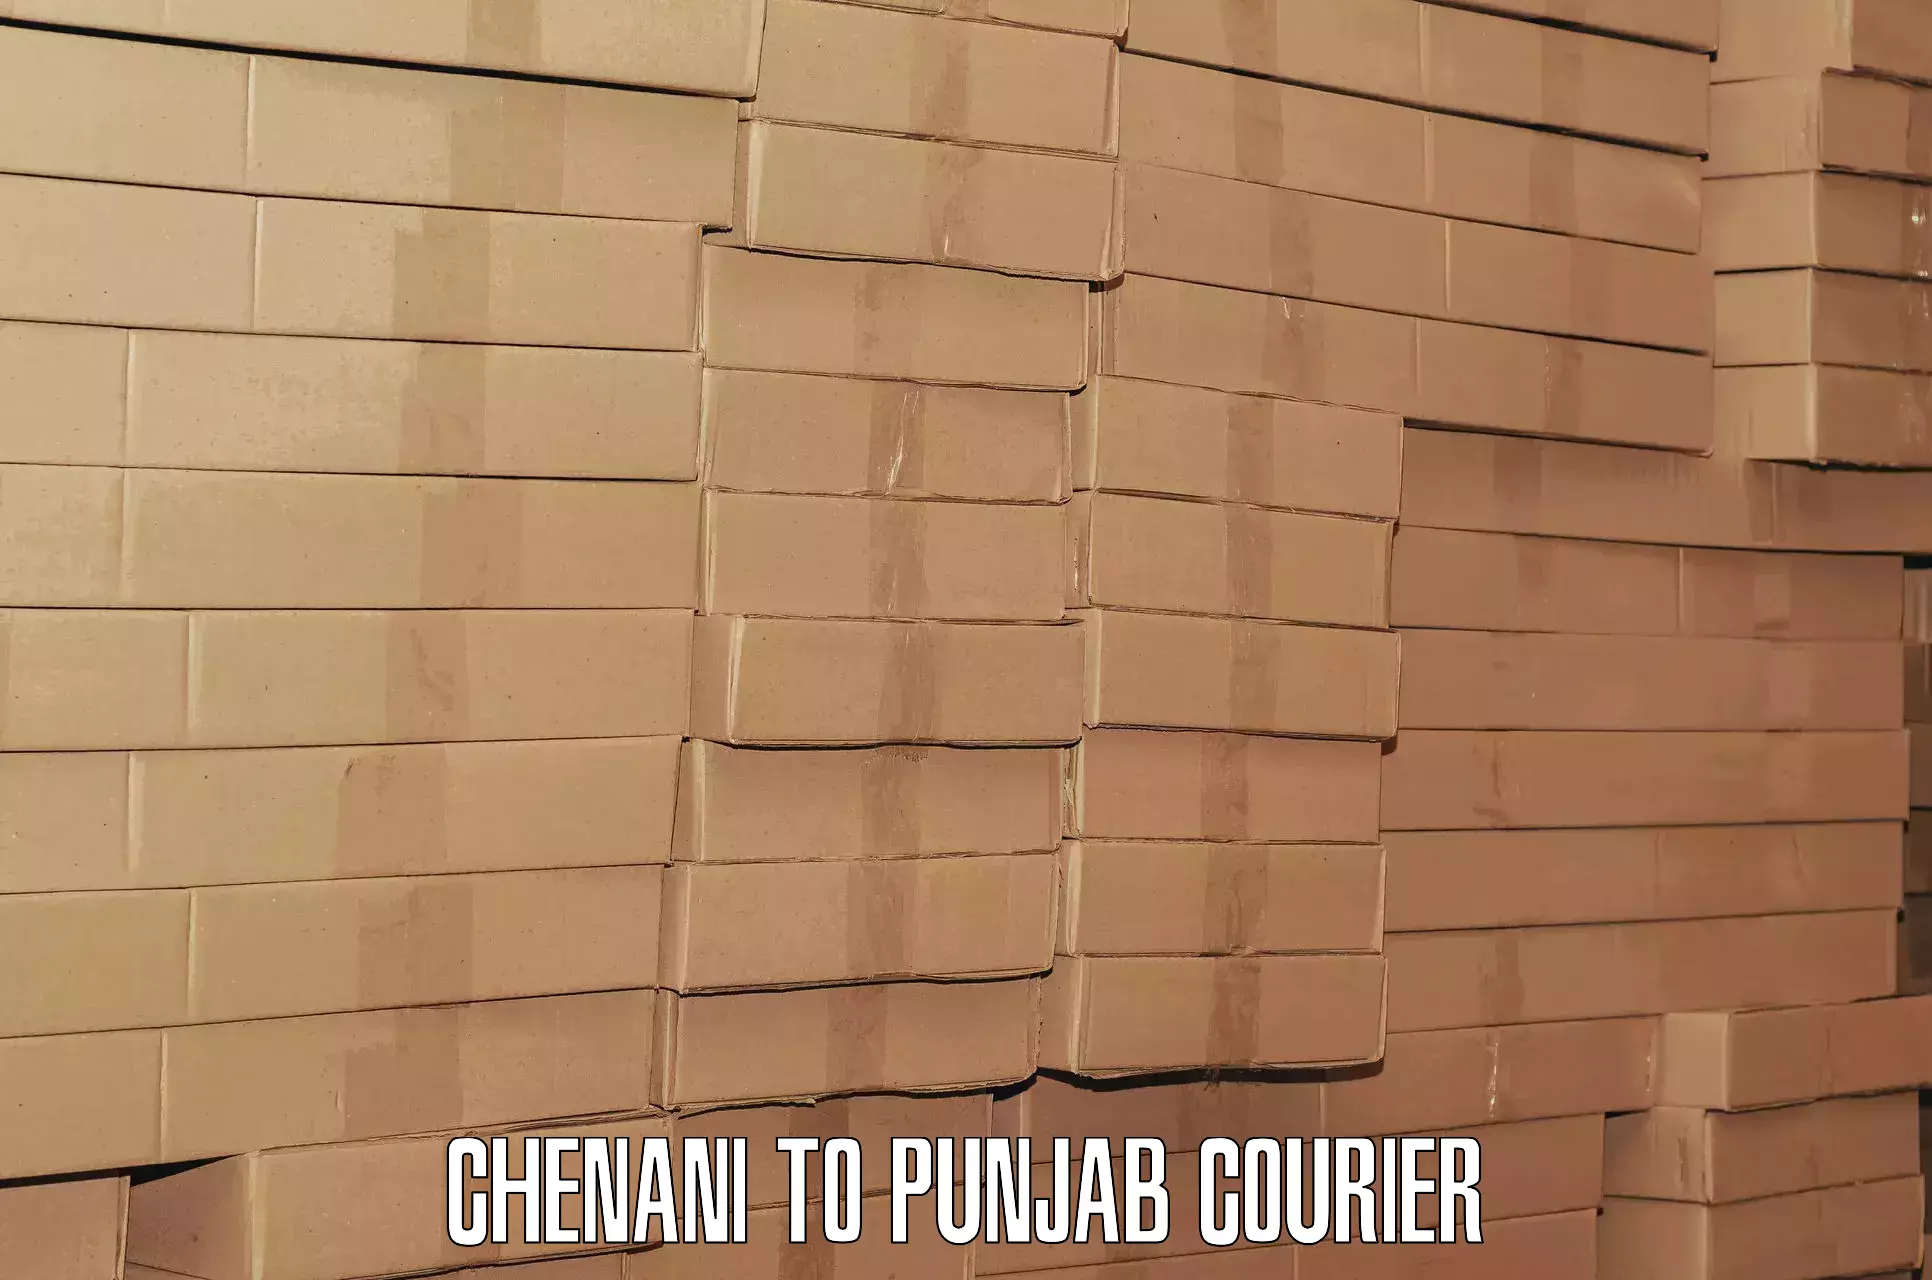 Door-to-door baggage service Chenani to Thapar Institute of Engineering and Technology Patiala